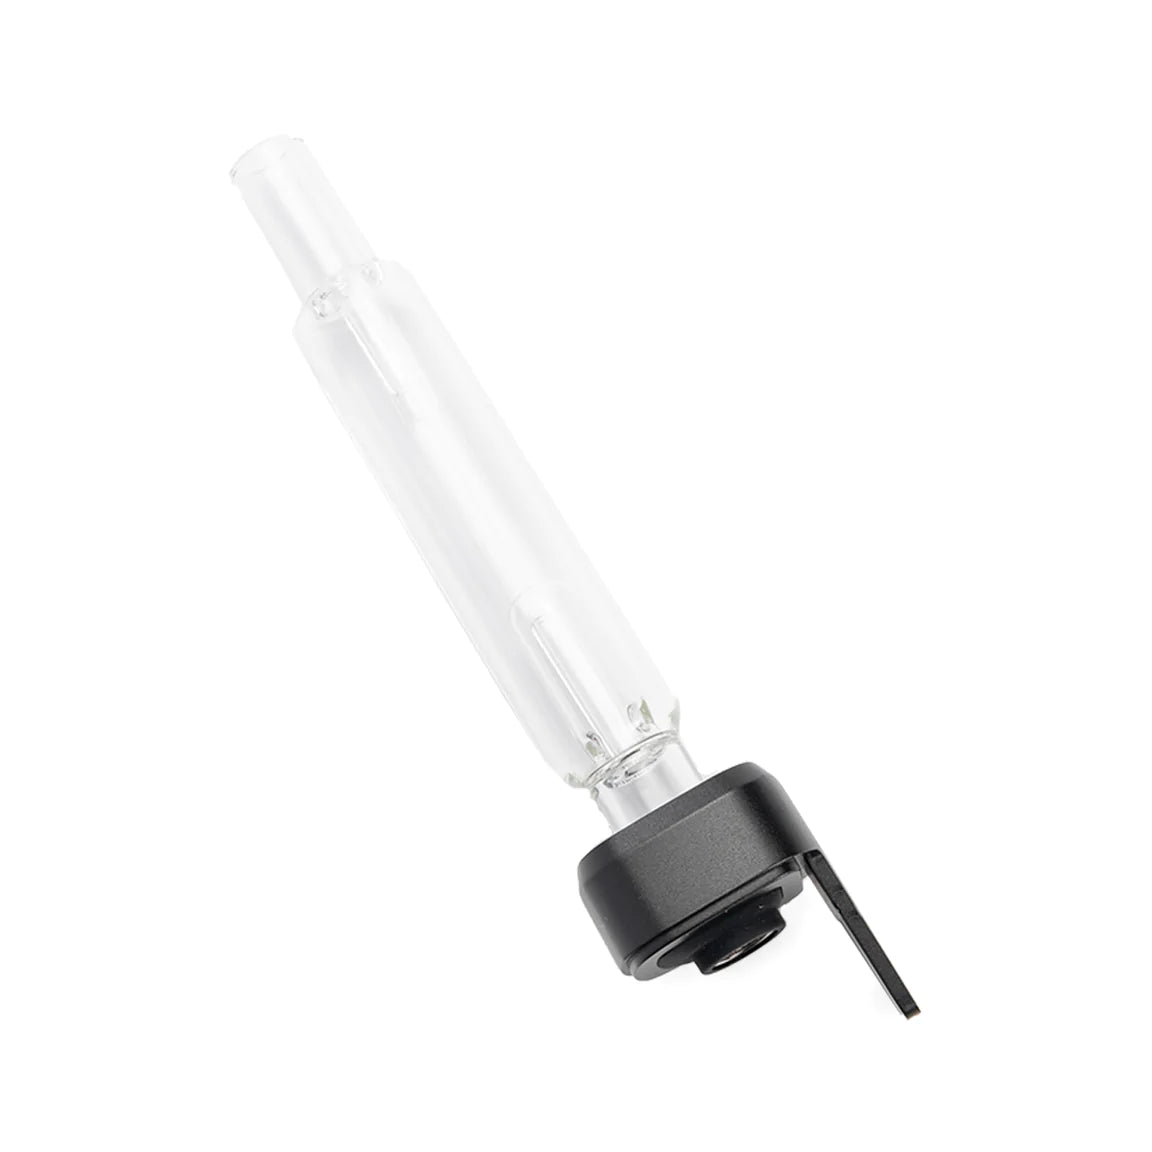 Xmax V3 Pro Herbal Vaporizer  Wick and Wire Co, Melbourne Australia - Wick  and Wire Co Australia